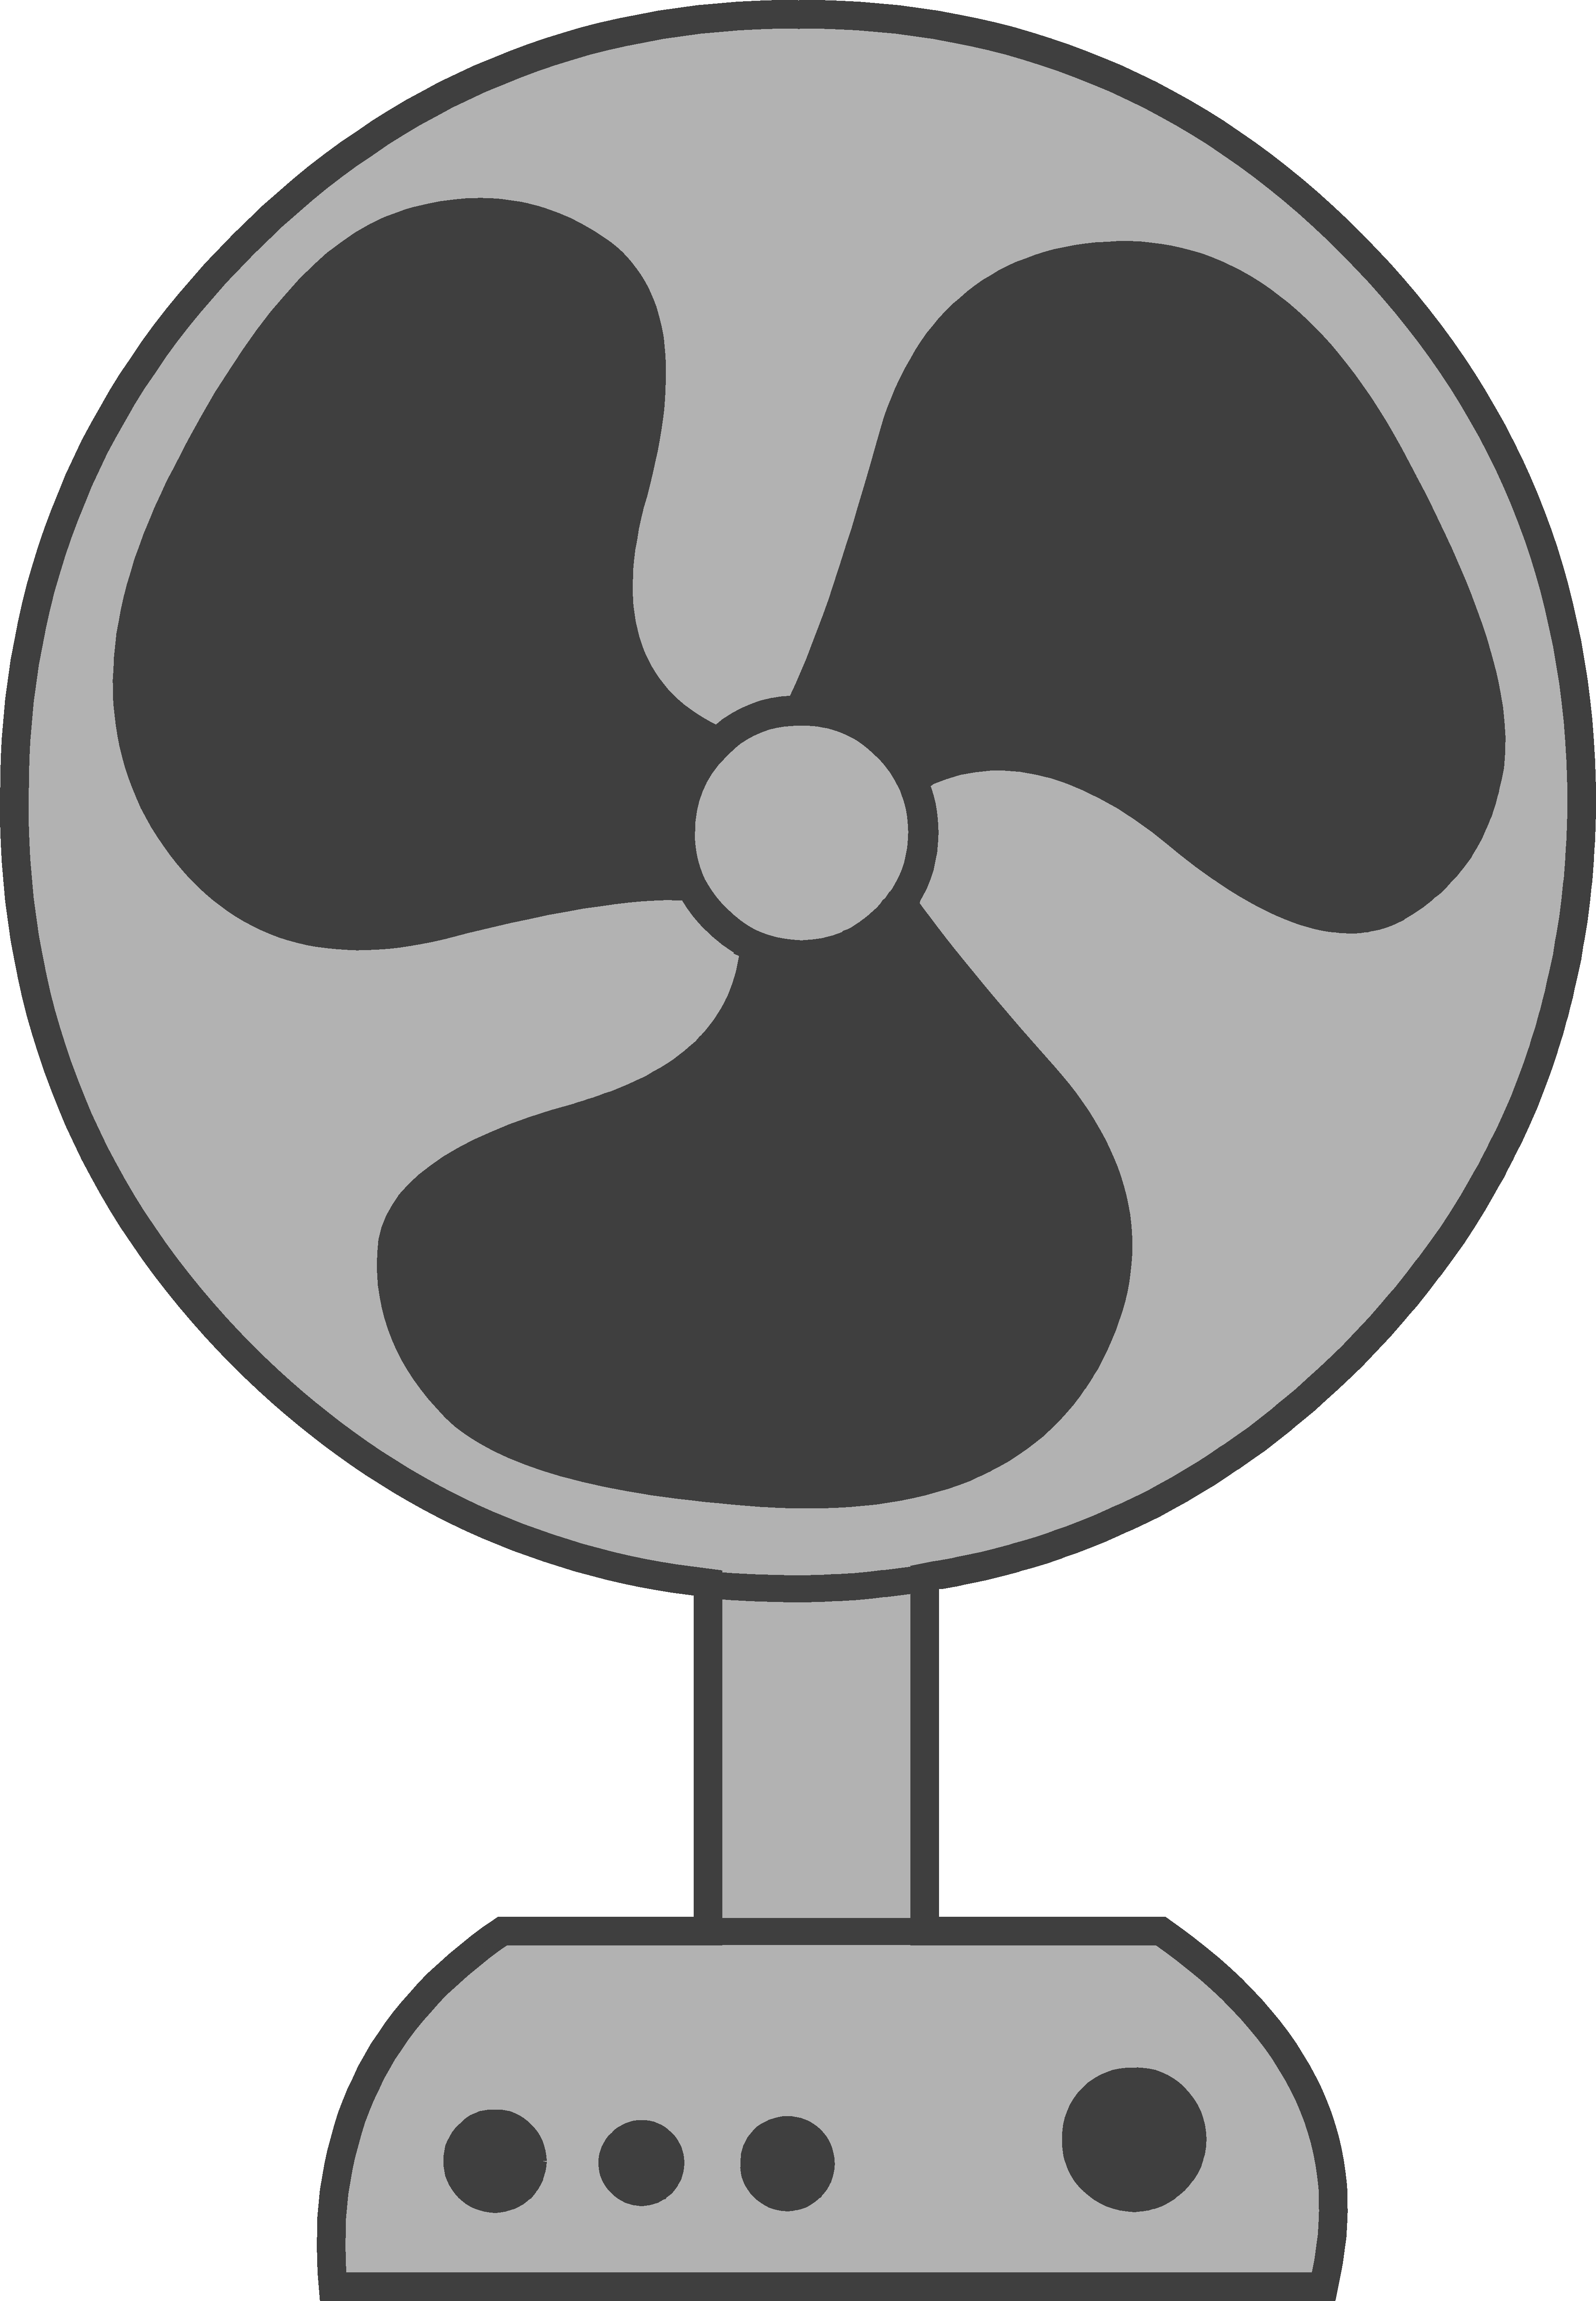 Clip Arts Related To : fan clipart. view all Metal Fan Cliparts). 